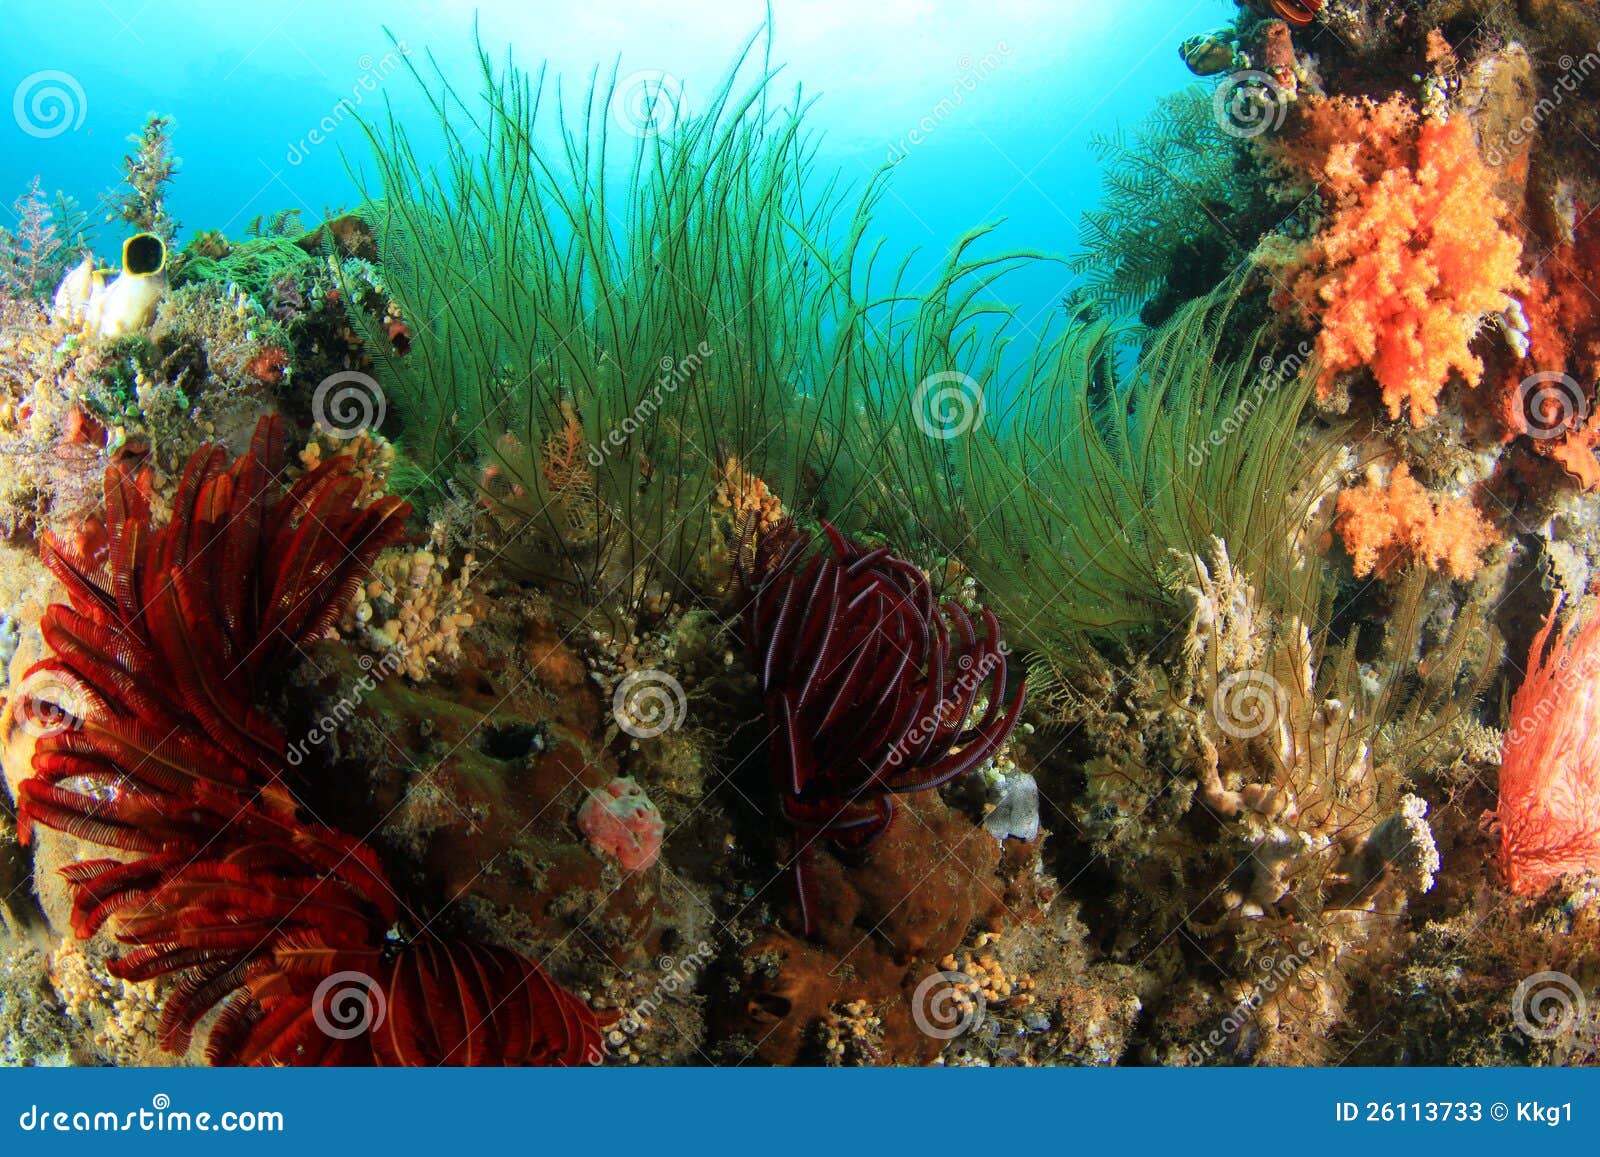 coral reefs and fishes